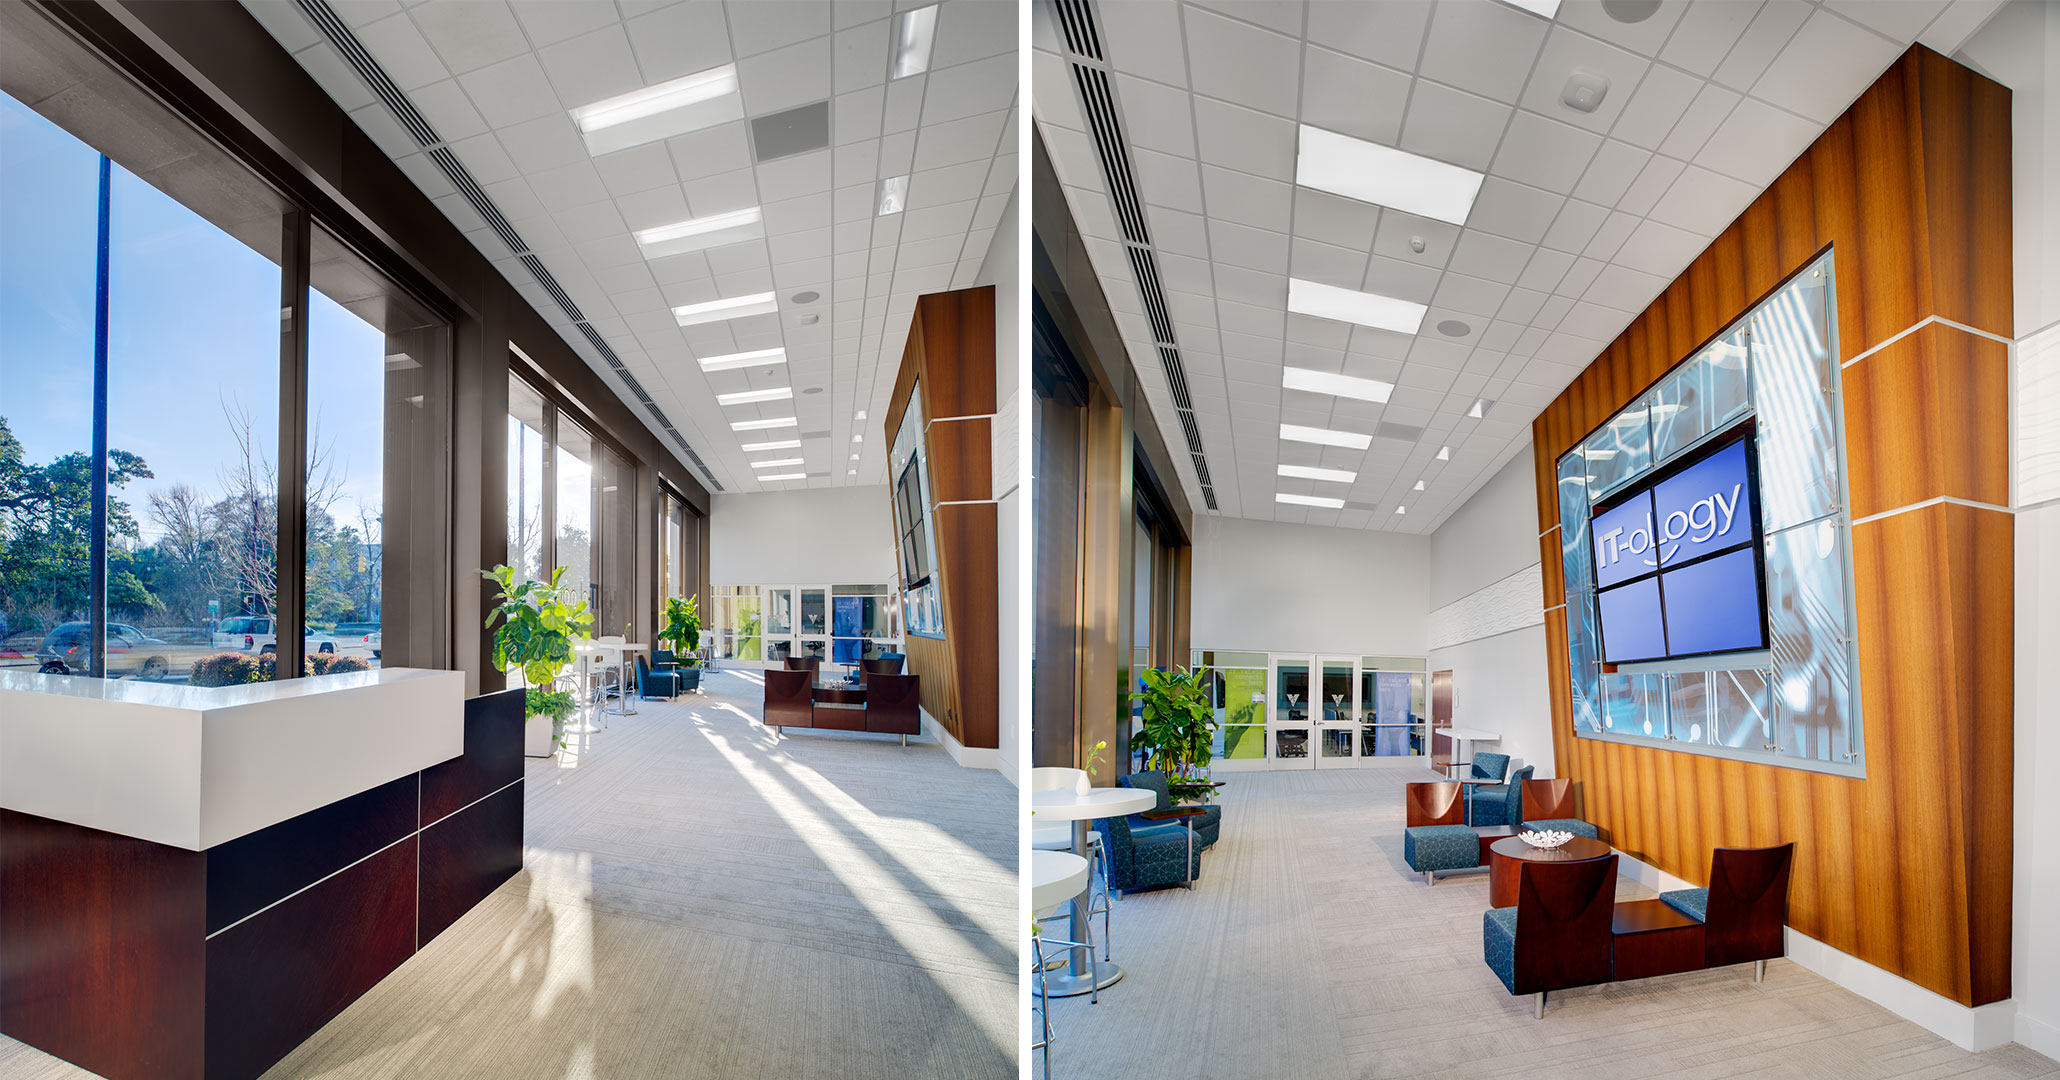 Boudreaux architects worked with the IT-ology to provide interior design and programming services for their new modern technologically advanced office space.